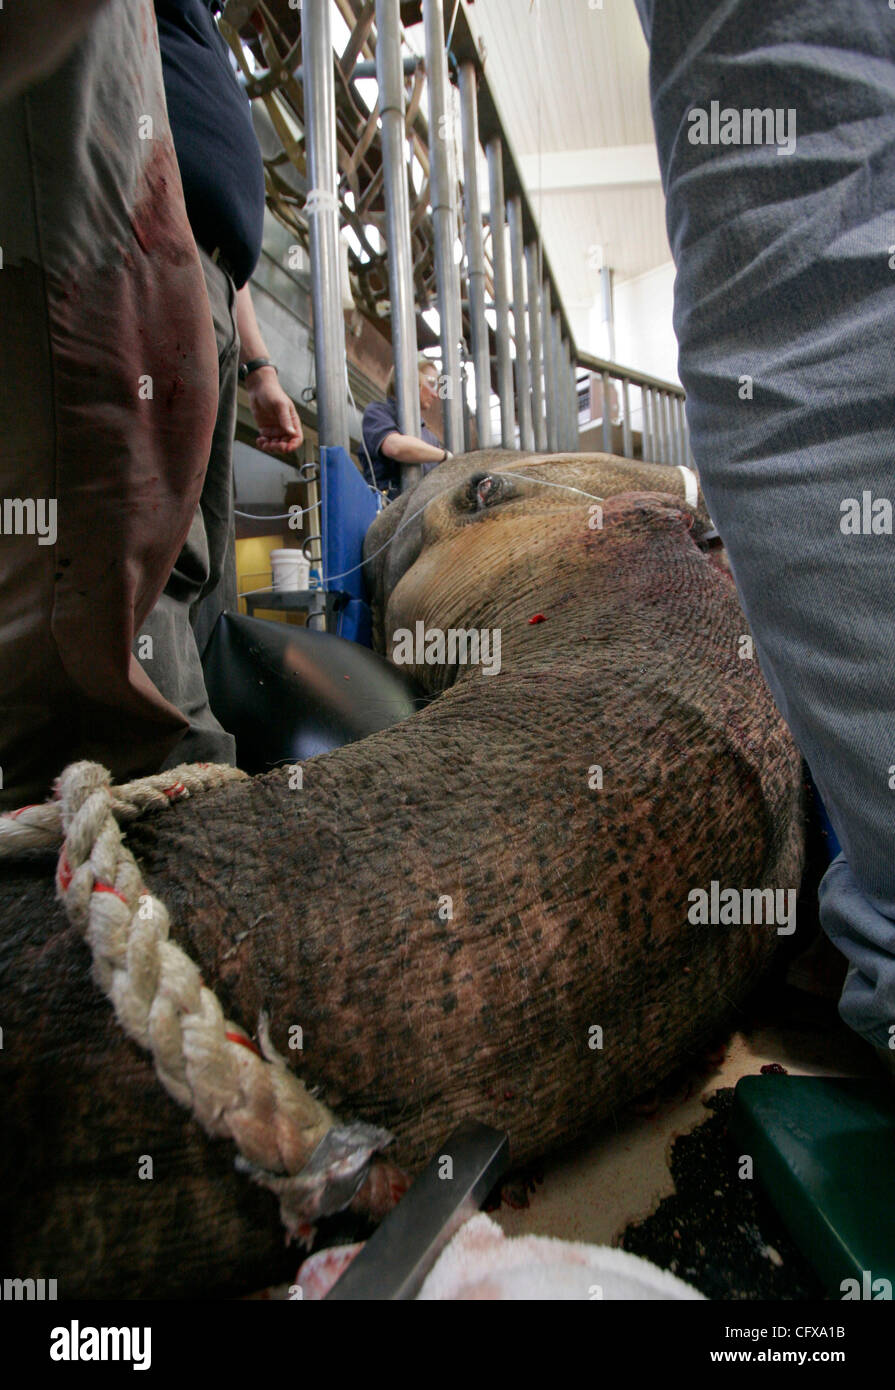 Apr 01, 2007 - Portland, Oregon - Doctors stand over Tusko the Asian elephant during surgery to remove an infected left tusk at the Oregon Zoo. The 6.75-ton, 35-year-old bull elephant had surgery in February to try to remove the chronically infected, broken left tusk, but doctors were unable to remo Stock Photo